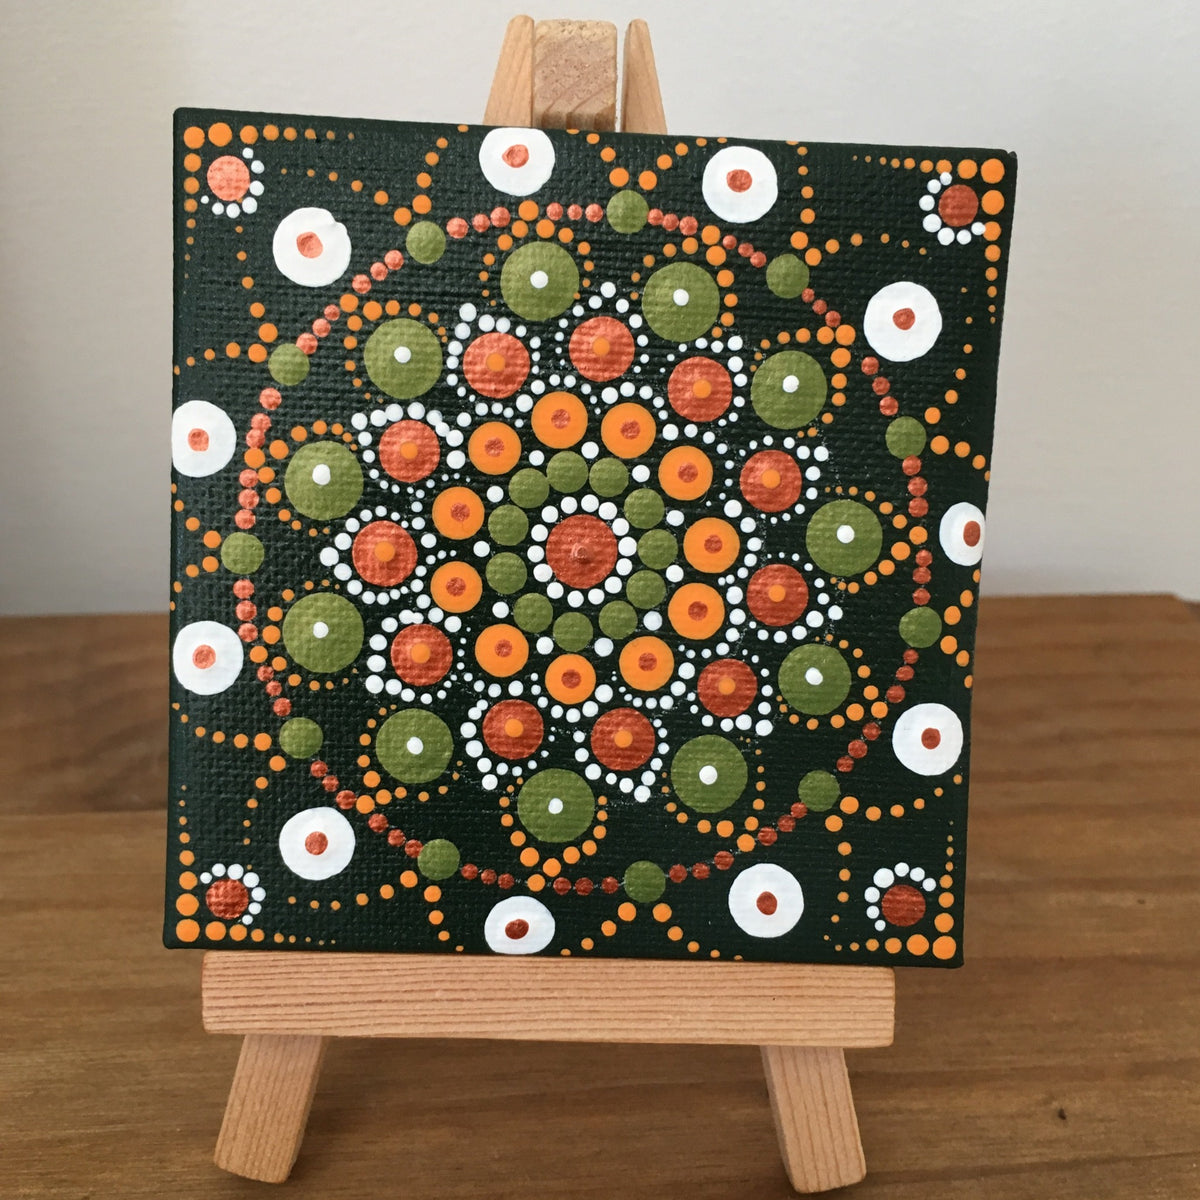 Green circle dot painting magnet - a mini canvas by IbbelDibbel